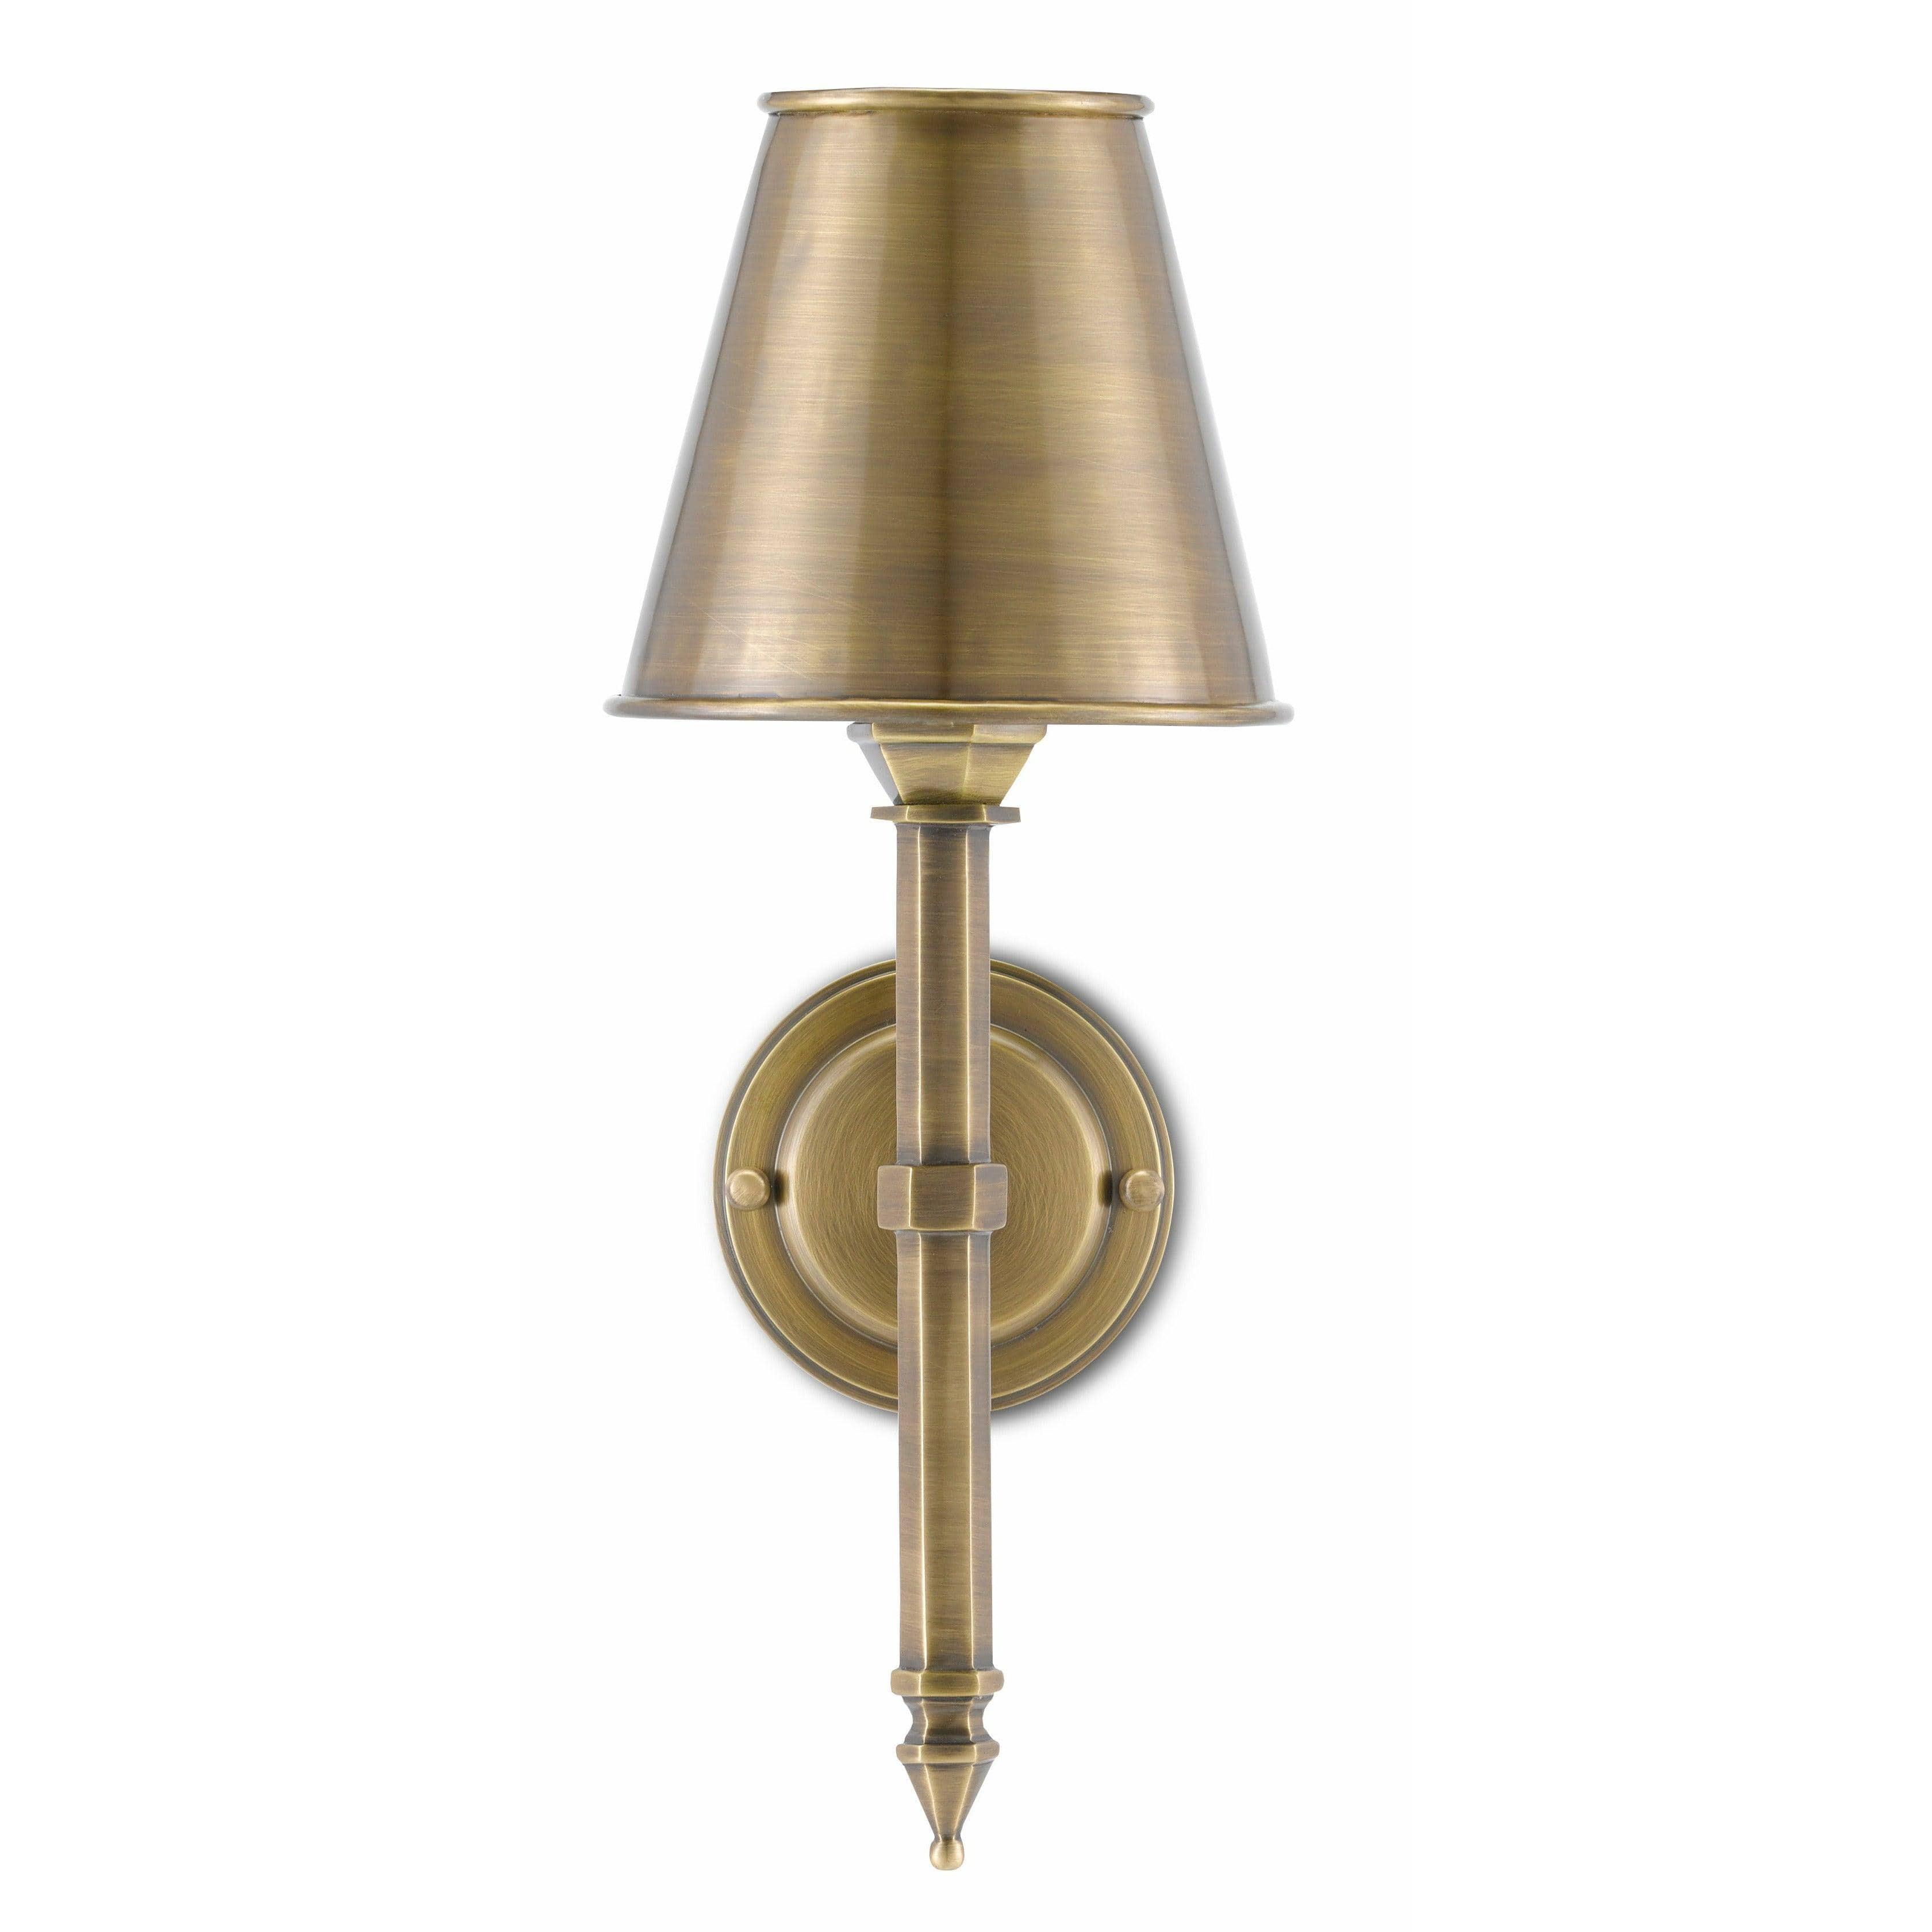 Currey and Company - Wollaton Wall Sconce - 5000-0174 | Montreal Lighting & Hardware